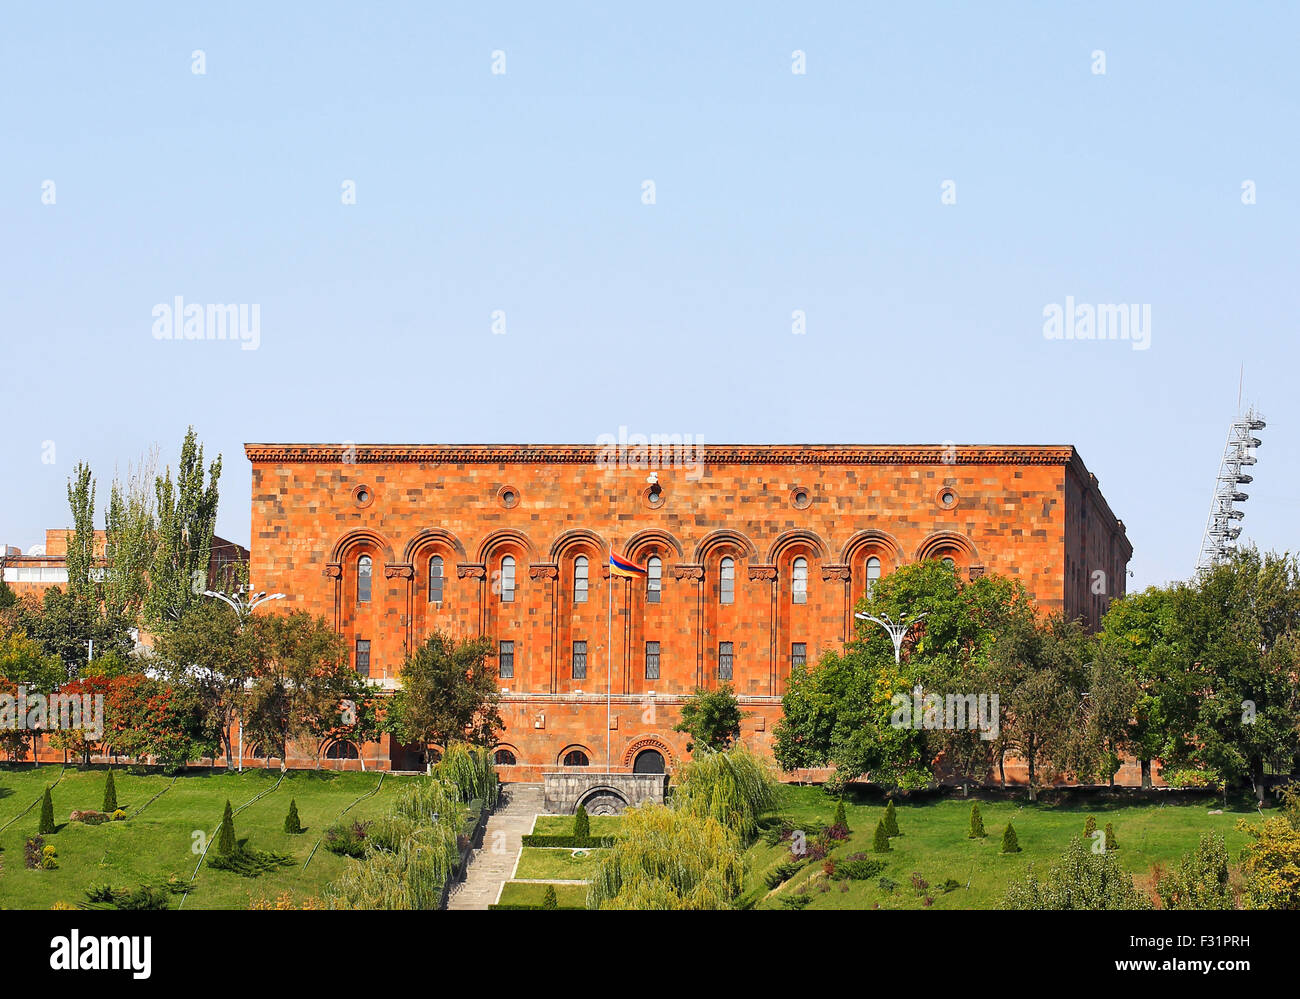 Facade of a massive building in the national armenian style Stock Photo